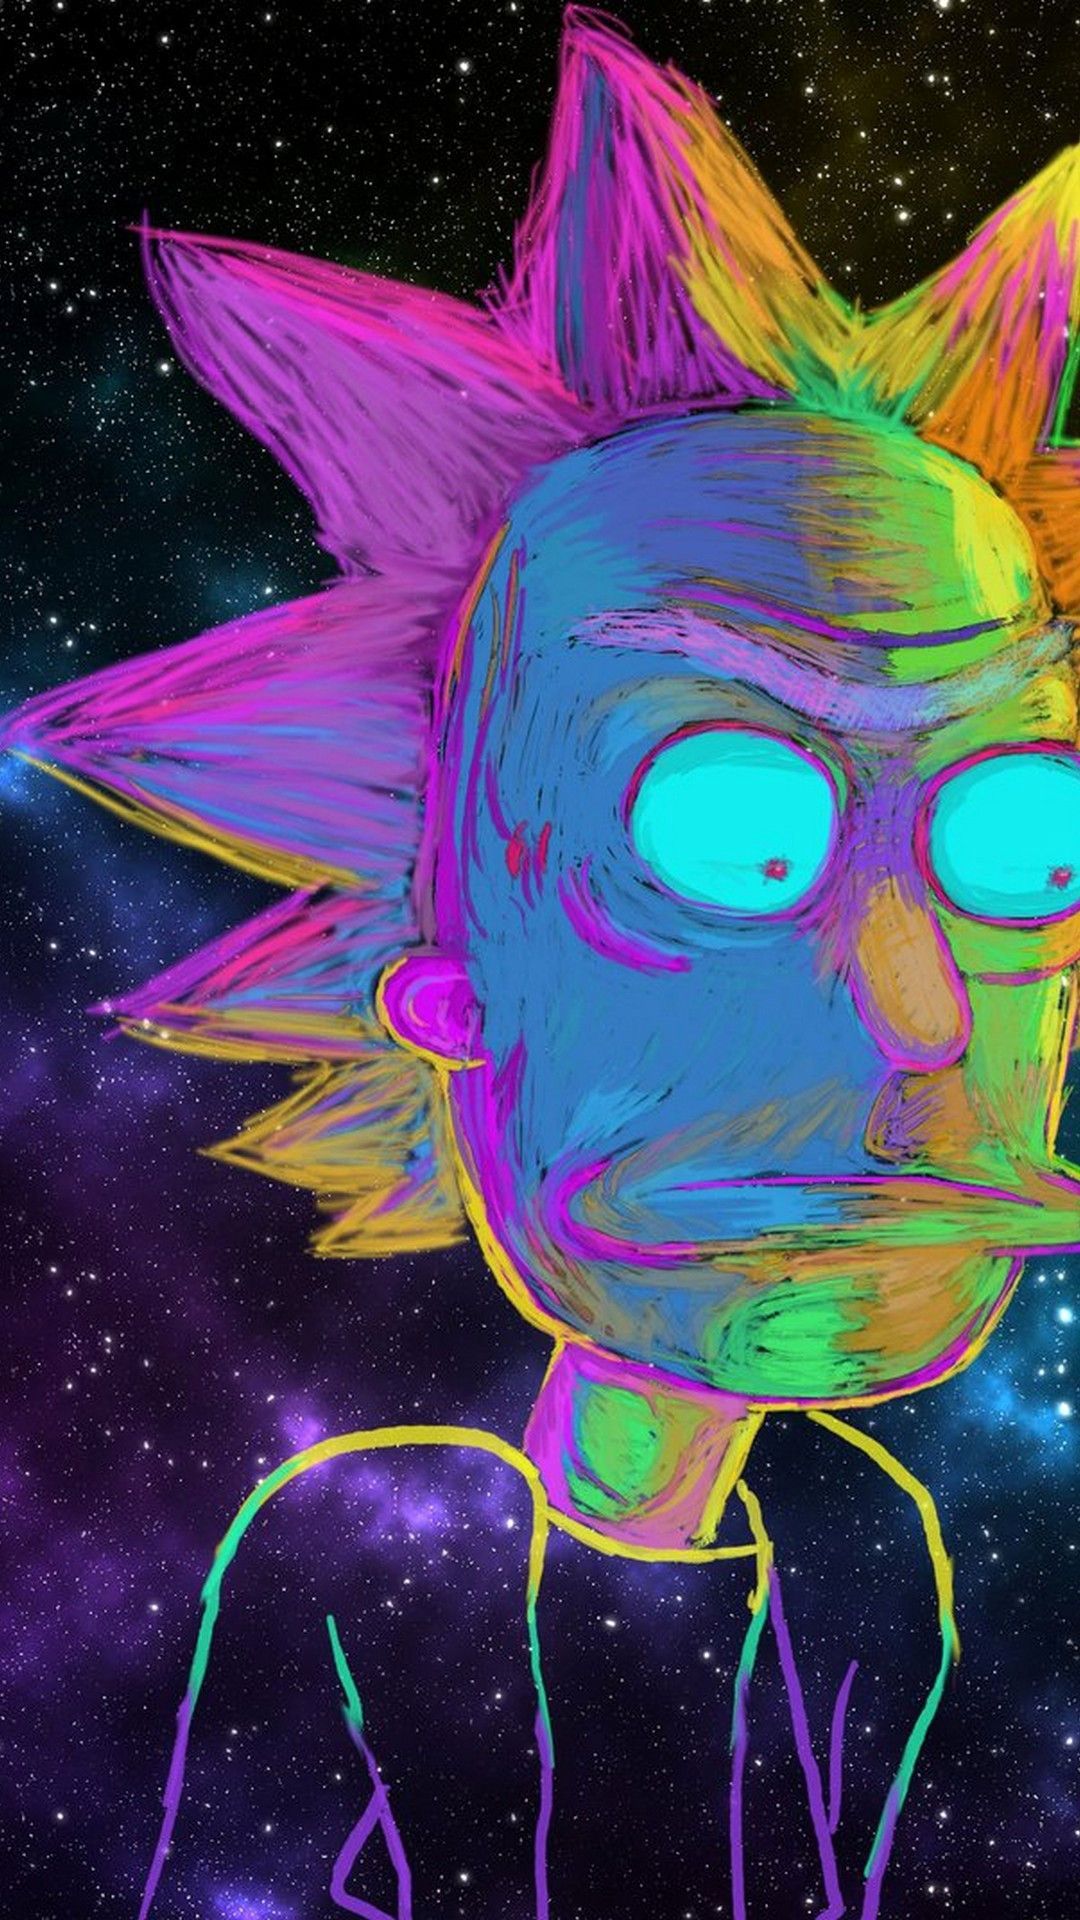 Rick And Morty Wallpaper Awesome Rick And Morty Pics HD in 2020